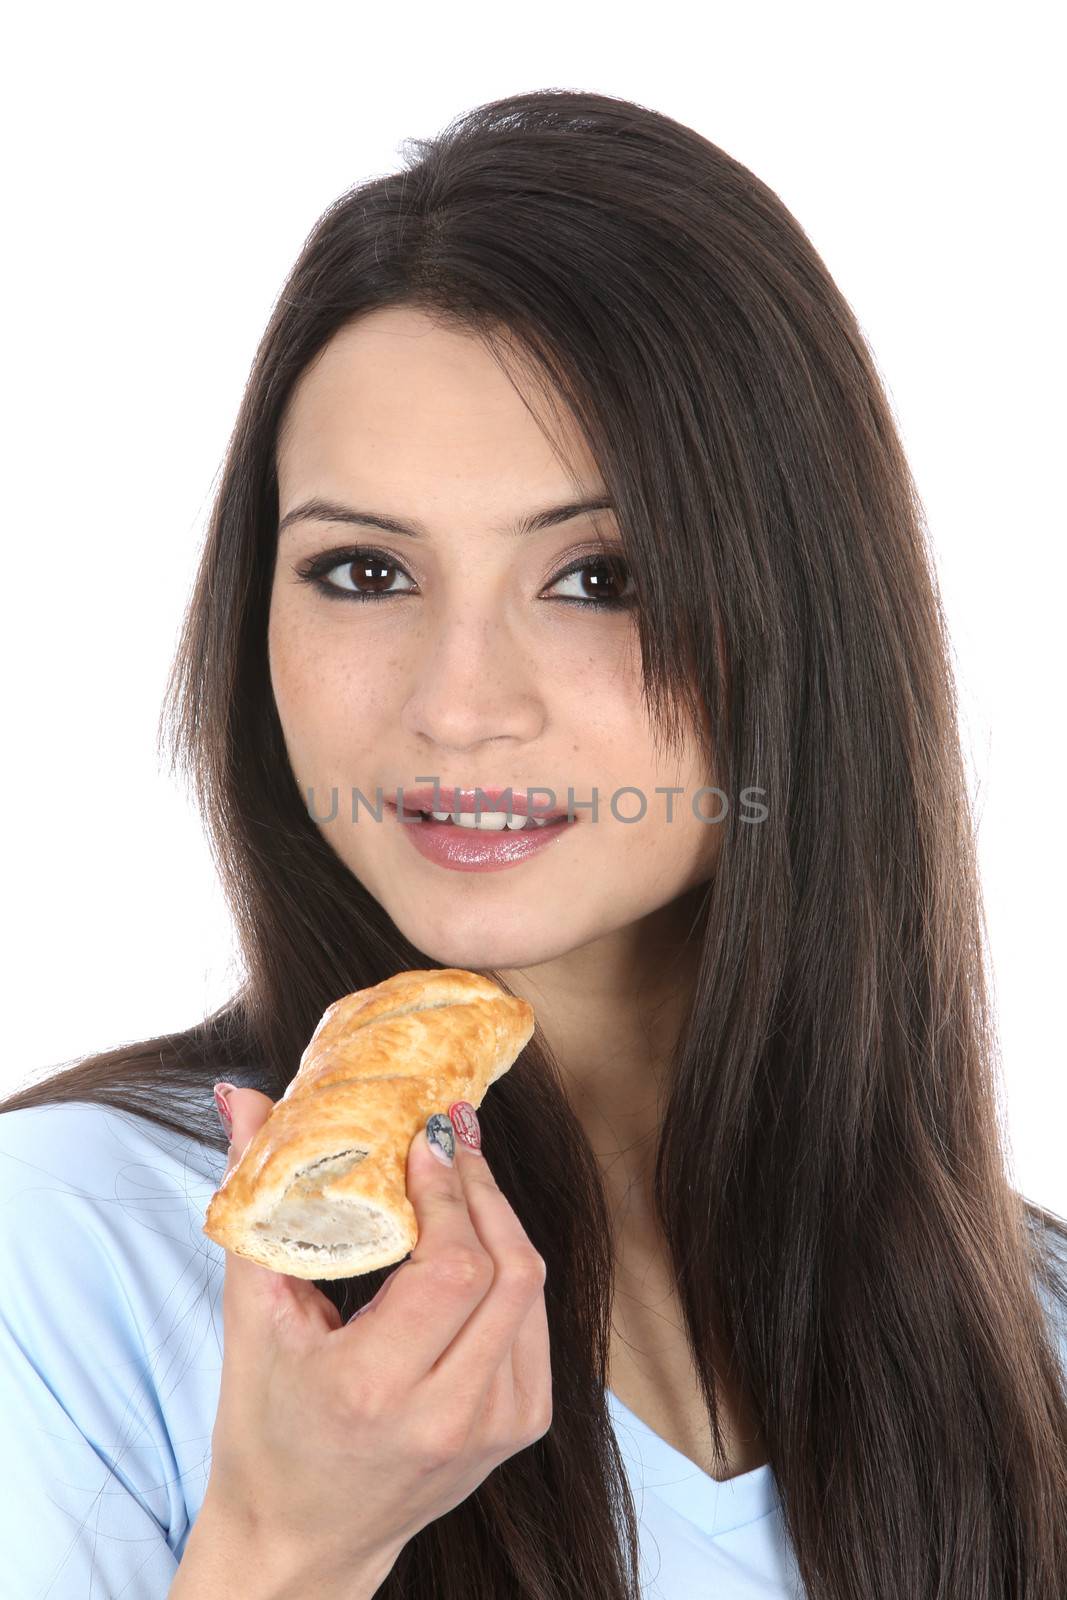 Model Released. Woman Eating Sausage Roll